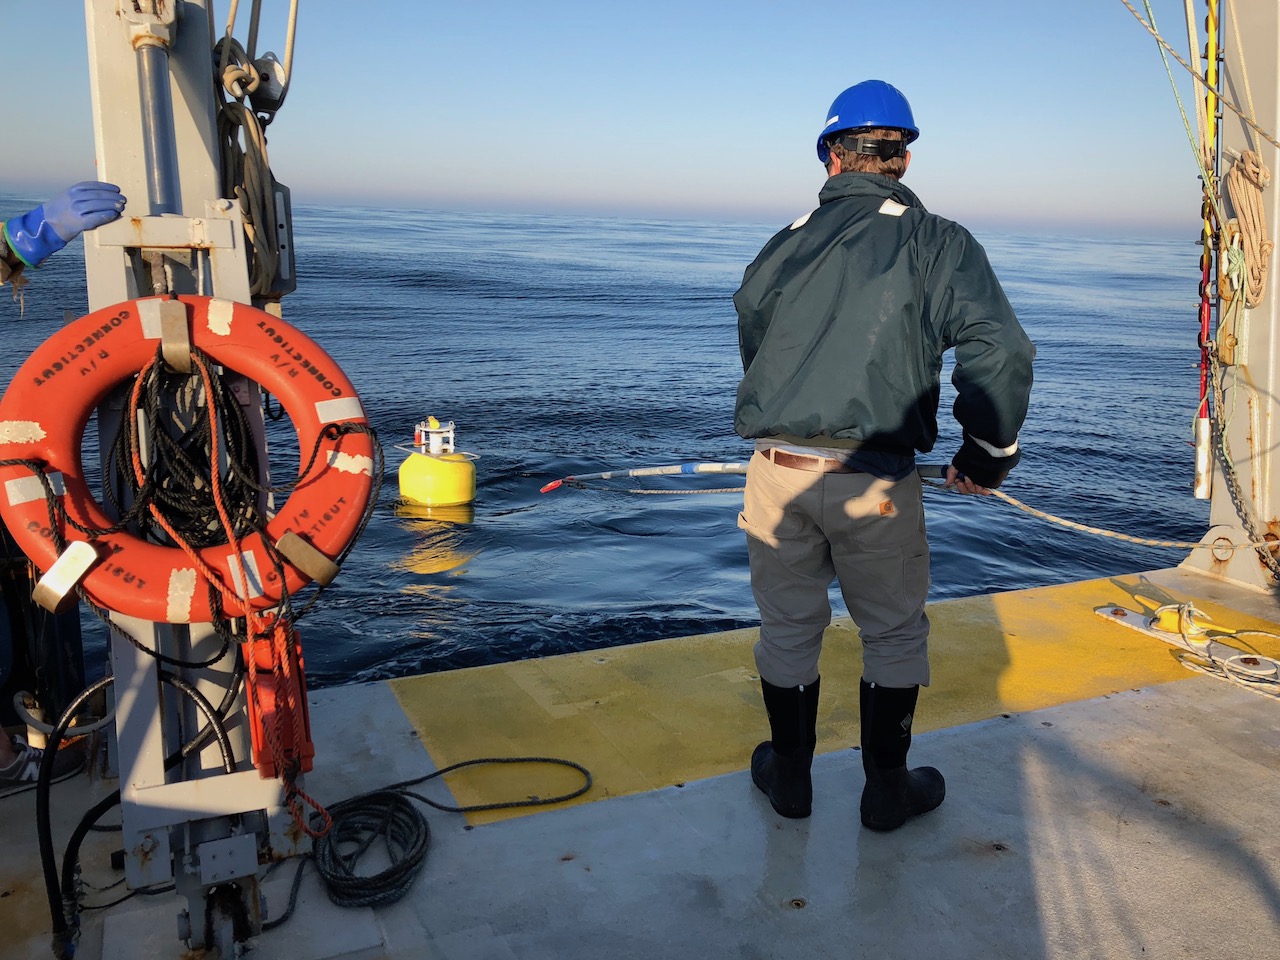 biologist wearing hard hat lowering gear into the water from the stern of a boat